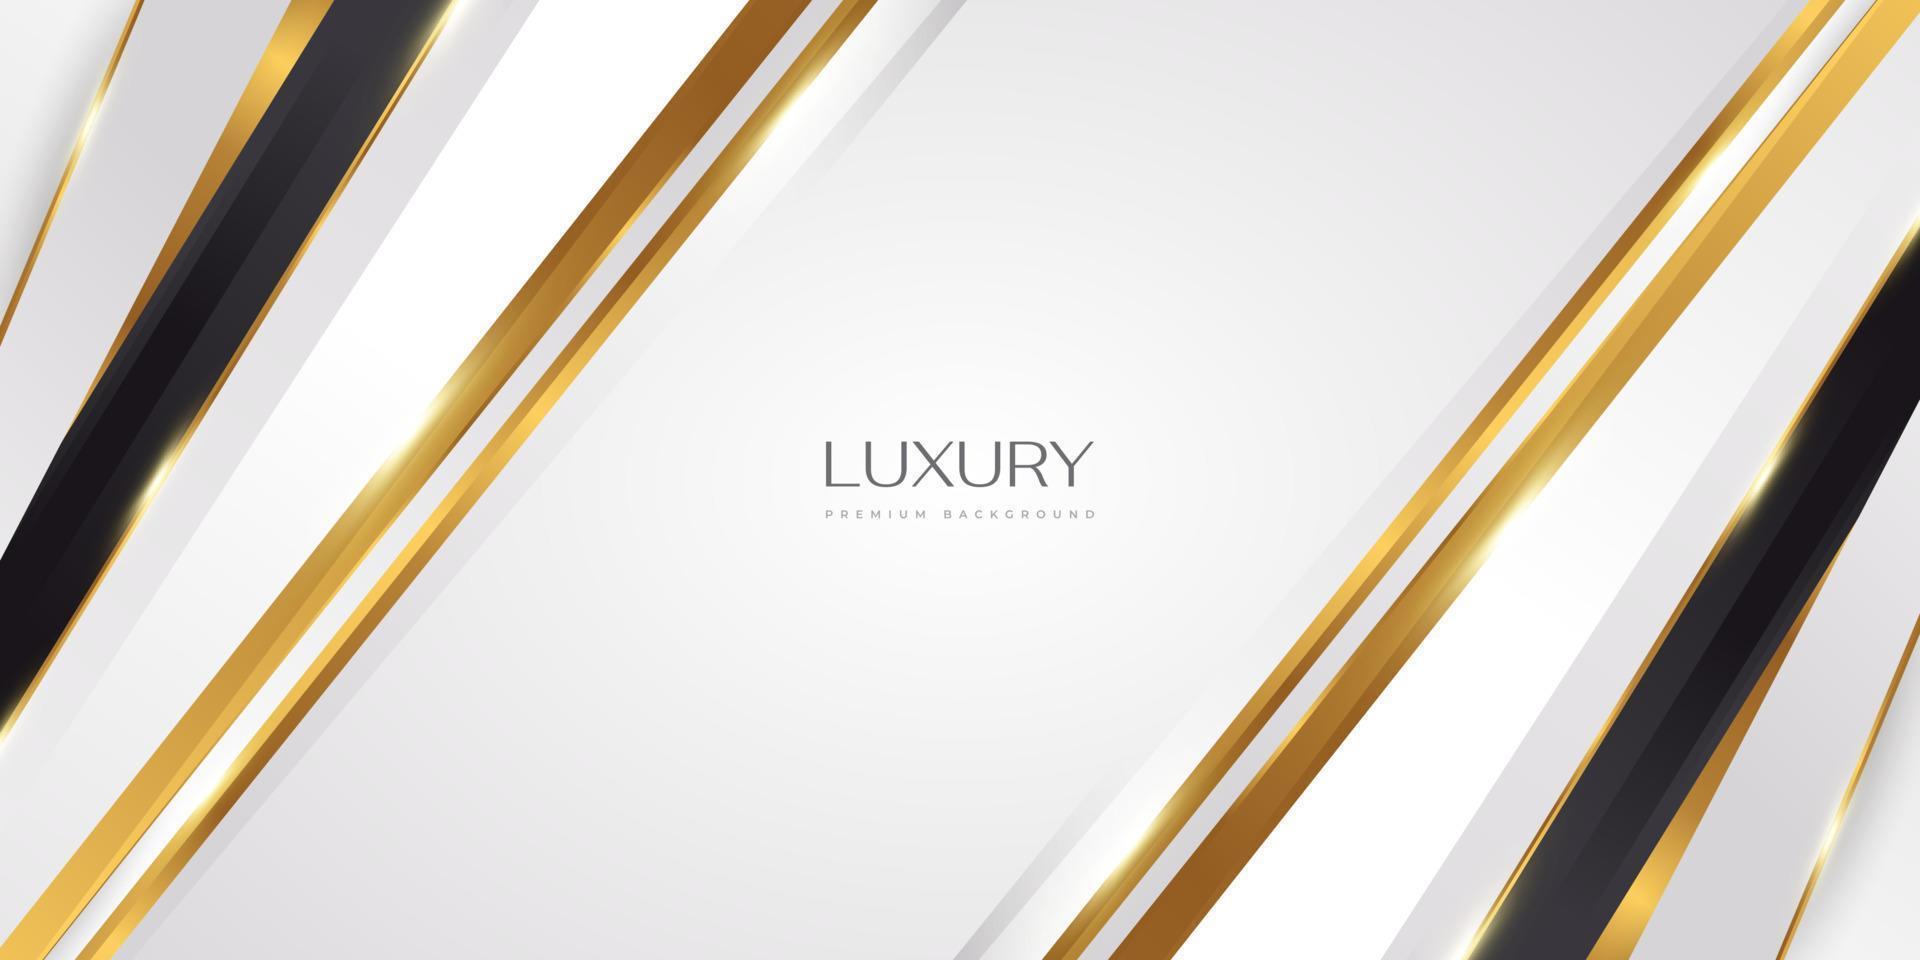 Luxury White and Gold Background with Golden Lines and Paper Cut Style. Premium Gray and Gold Background for Award, Banner, Card, Nomination, Ceremony, Formal Invitation or Certificate Design vector